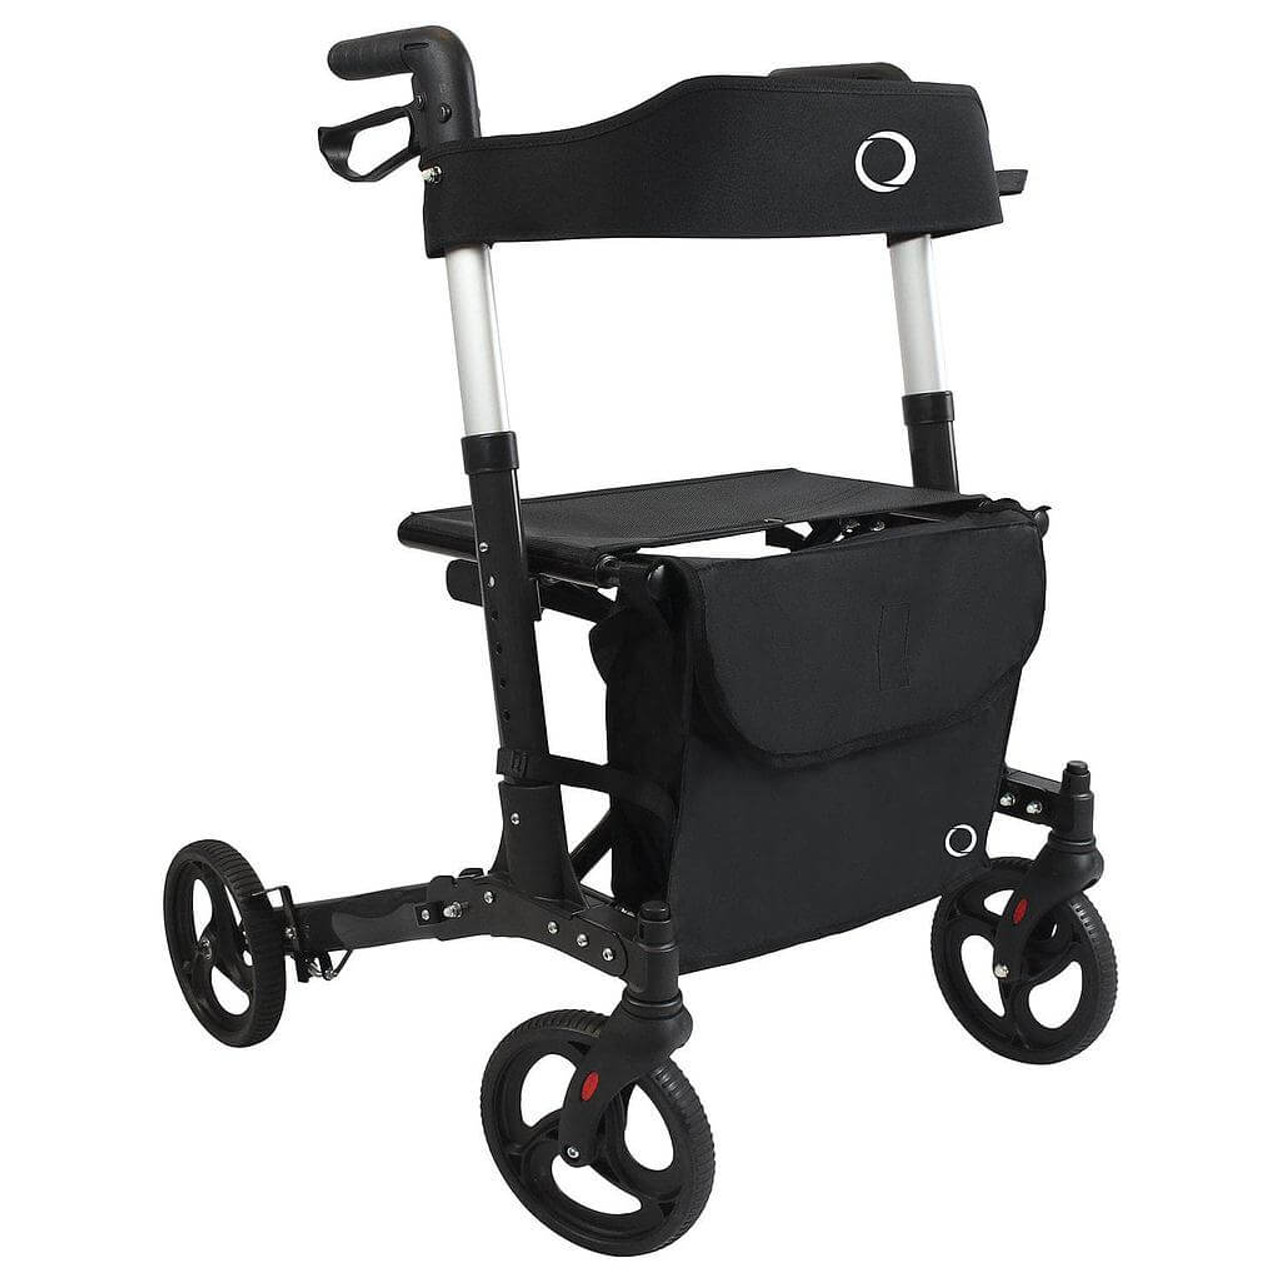 Vive Rollator Walker *Open Box* - Secure Mobility Aid with Oversized Wheels-Chicken Pieces